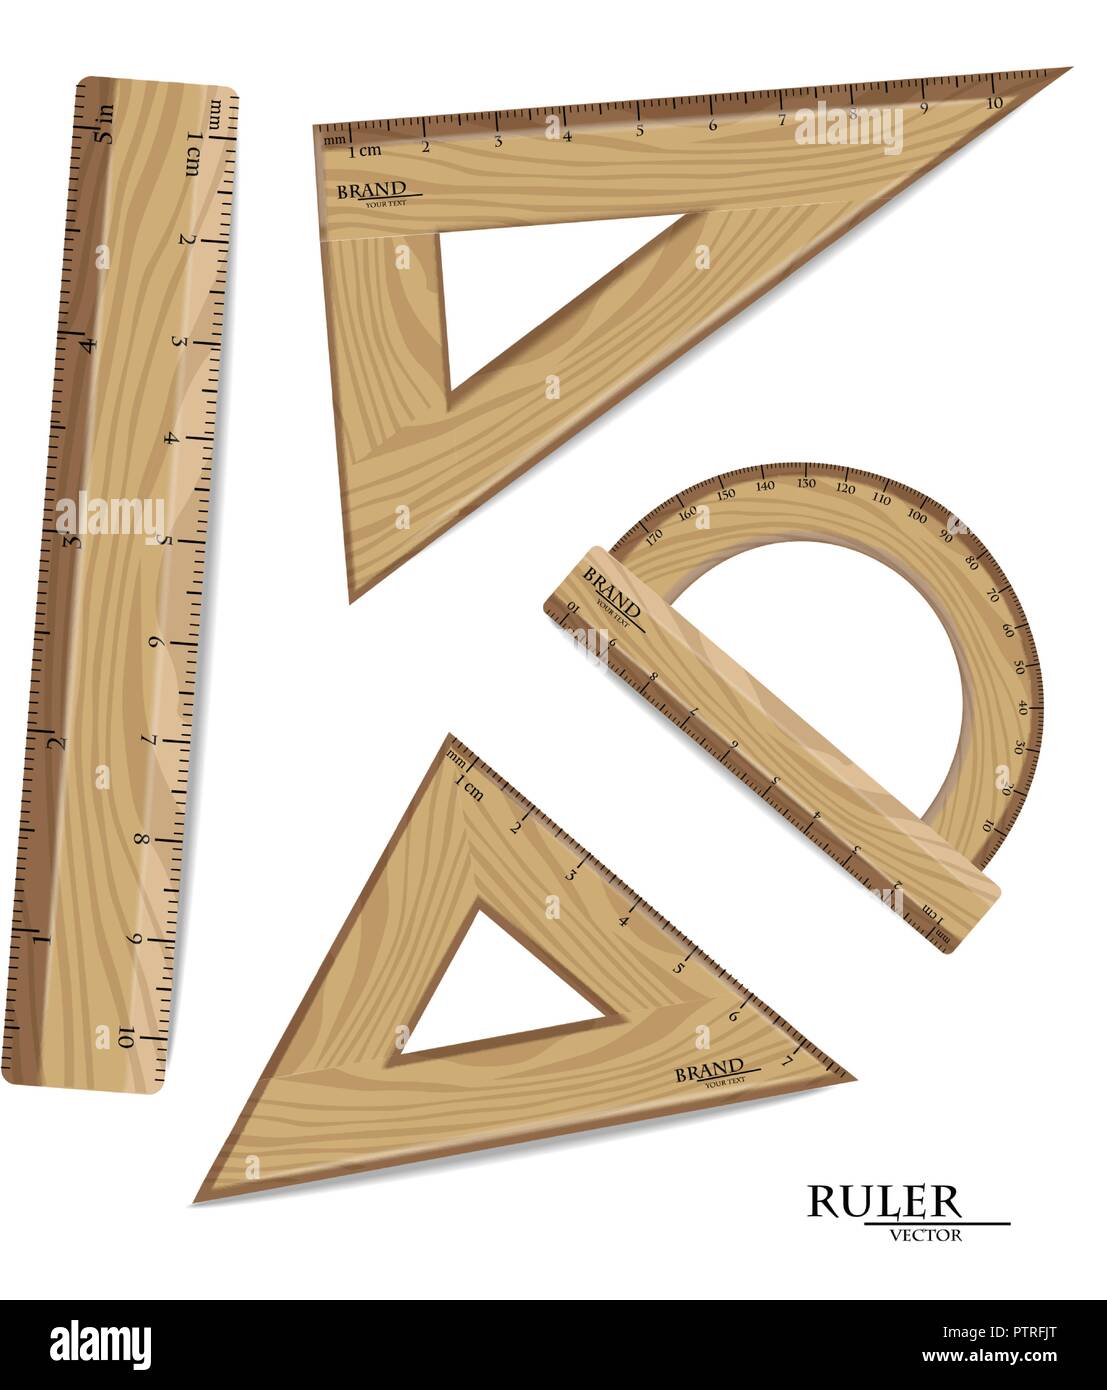 School Rulers Vector. Realistic Classic Wooden Metric Imperial Ruler.  Centimeter And Inch. Measure Tools Equipment Isolated On White Illustration  Stock Vector by ©pikepicture 165804020